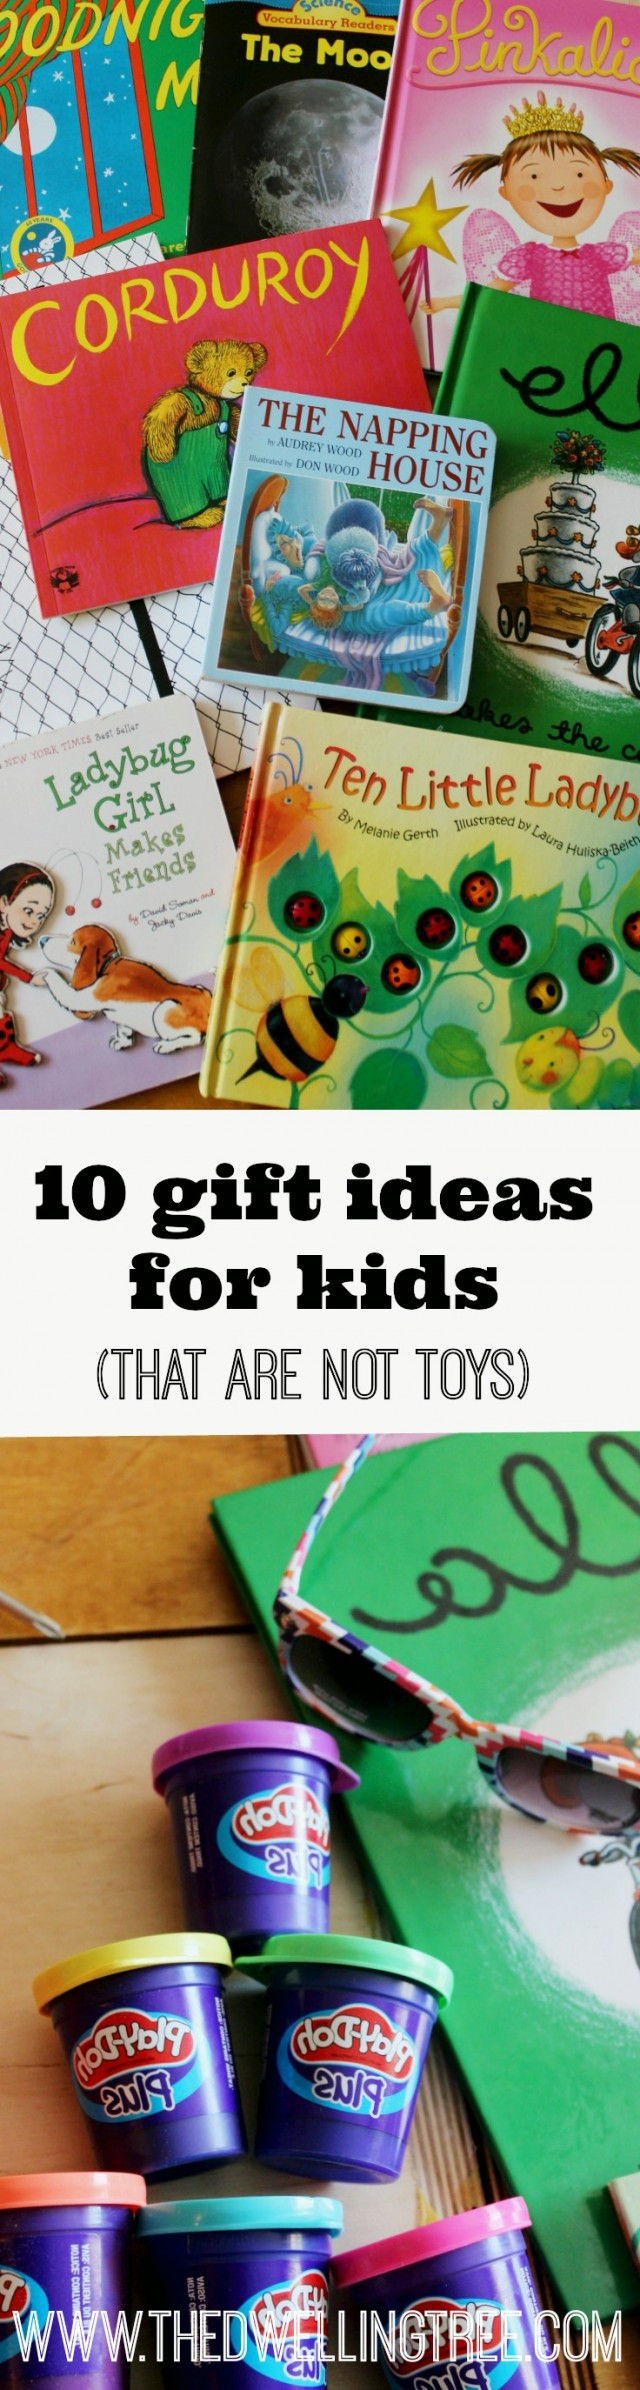 Gifts For Kids Not Toys
 10 t ideas for kids that are not toys Looking for